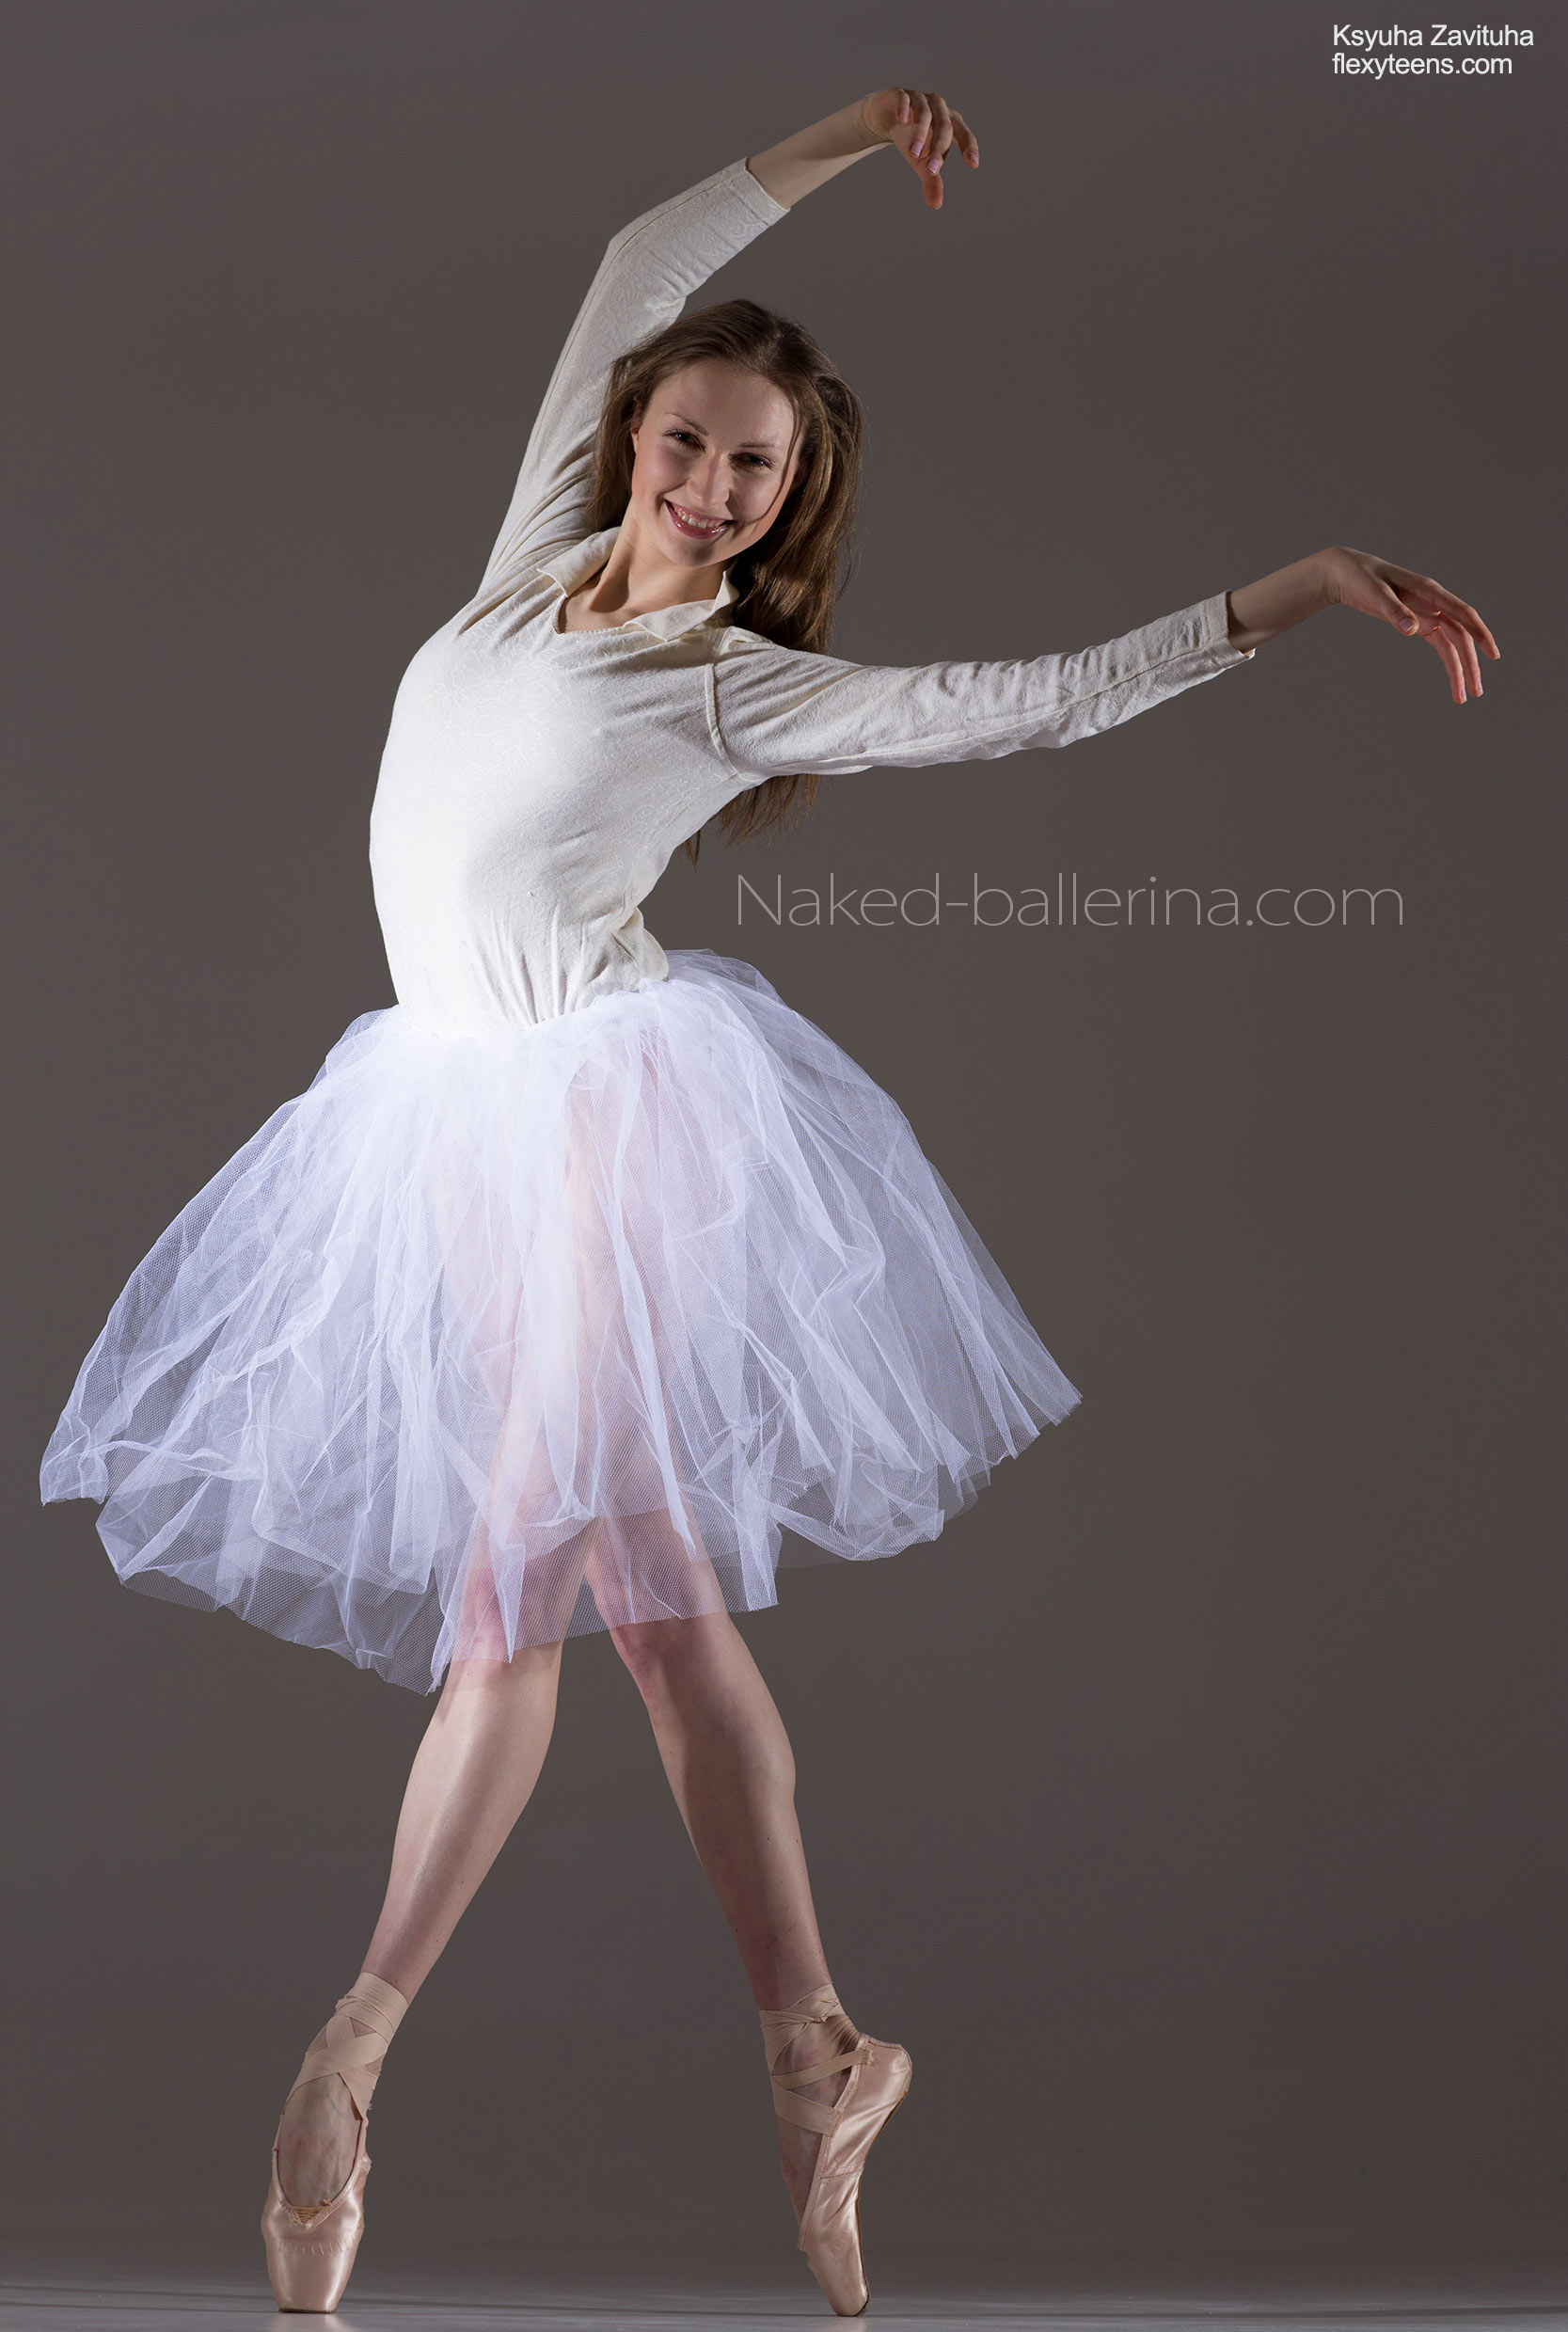 Free Nude Ballet Video 121